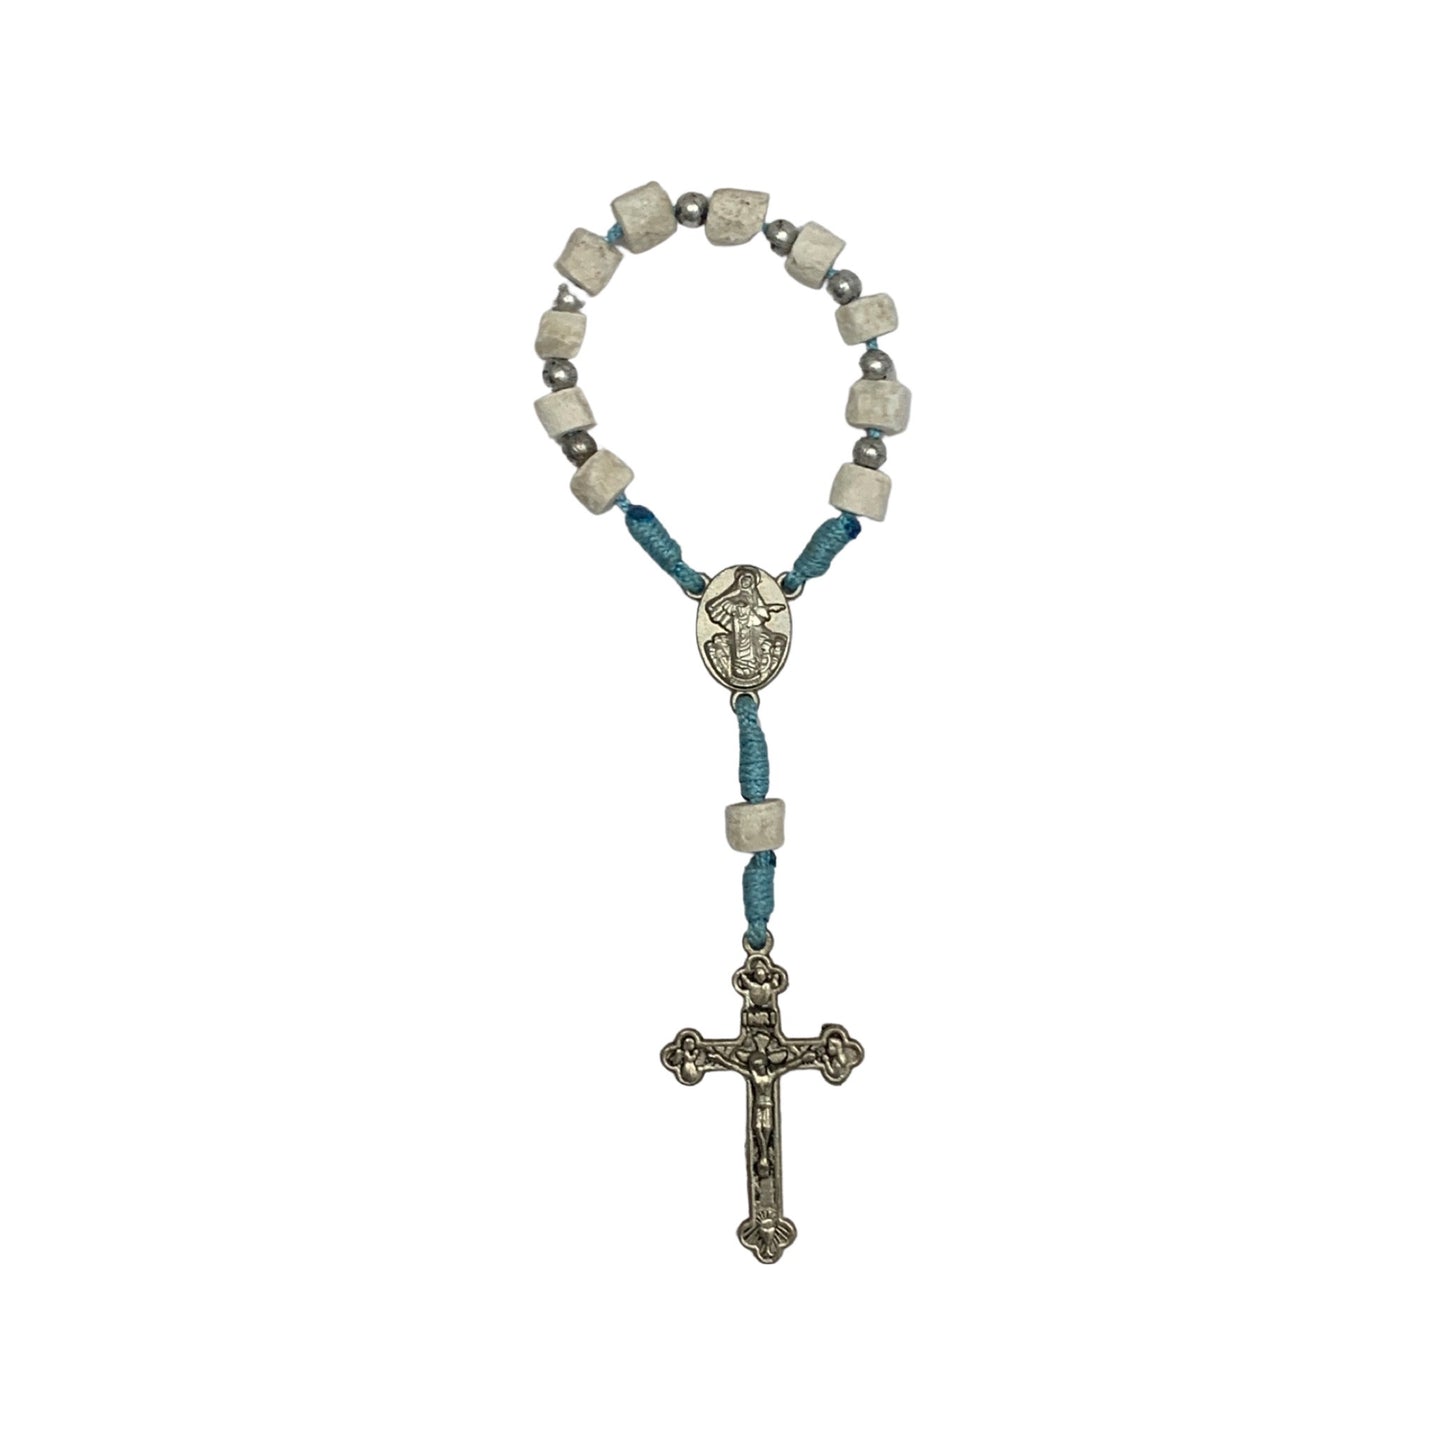 Refined Stone Our Lady Queen of Peace Decade Rosary